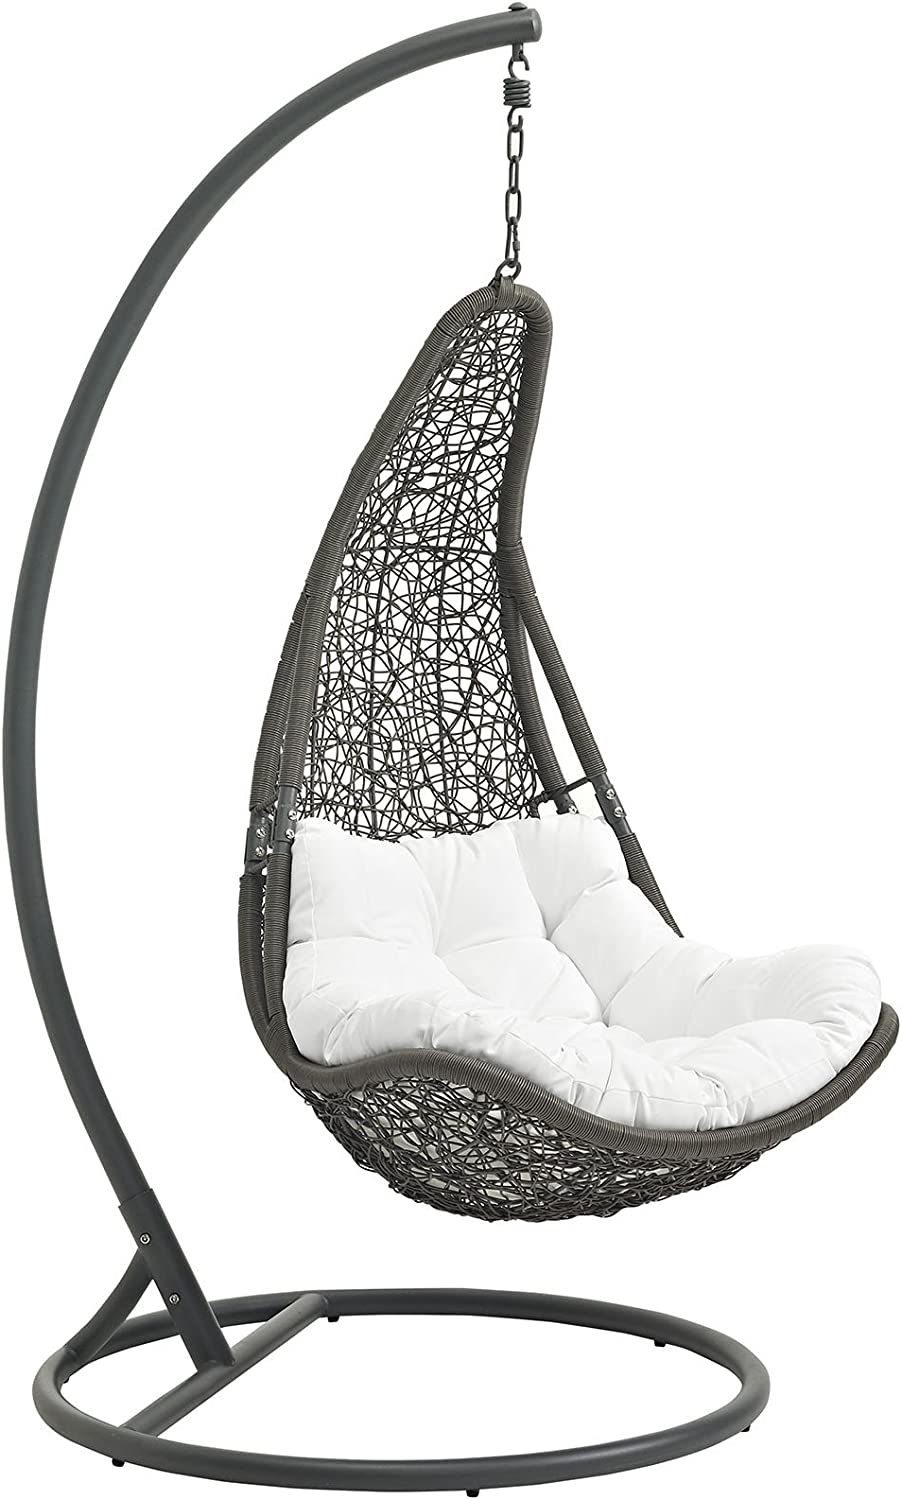 Modway Abate Wicker Rattan Outdoor Patio Porch Lounge Swing Chair Set with Stand in Gray White